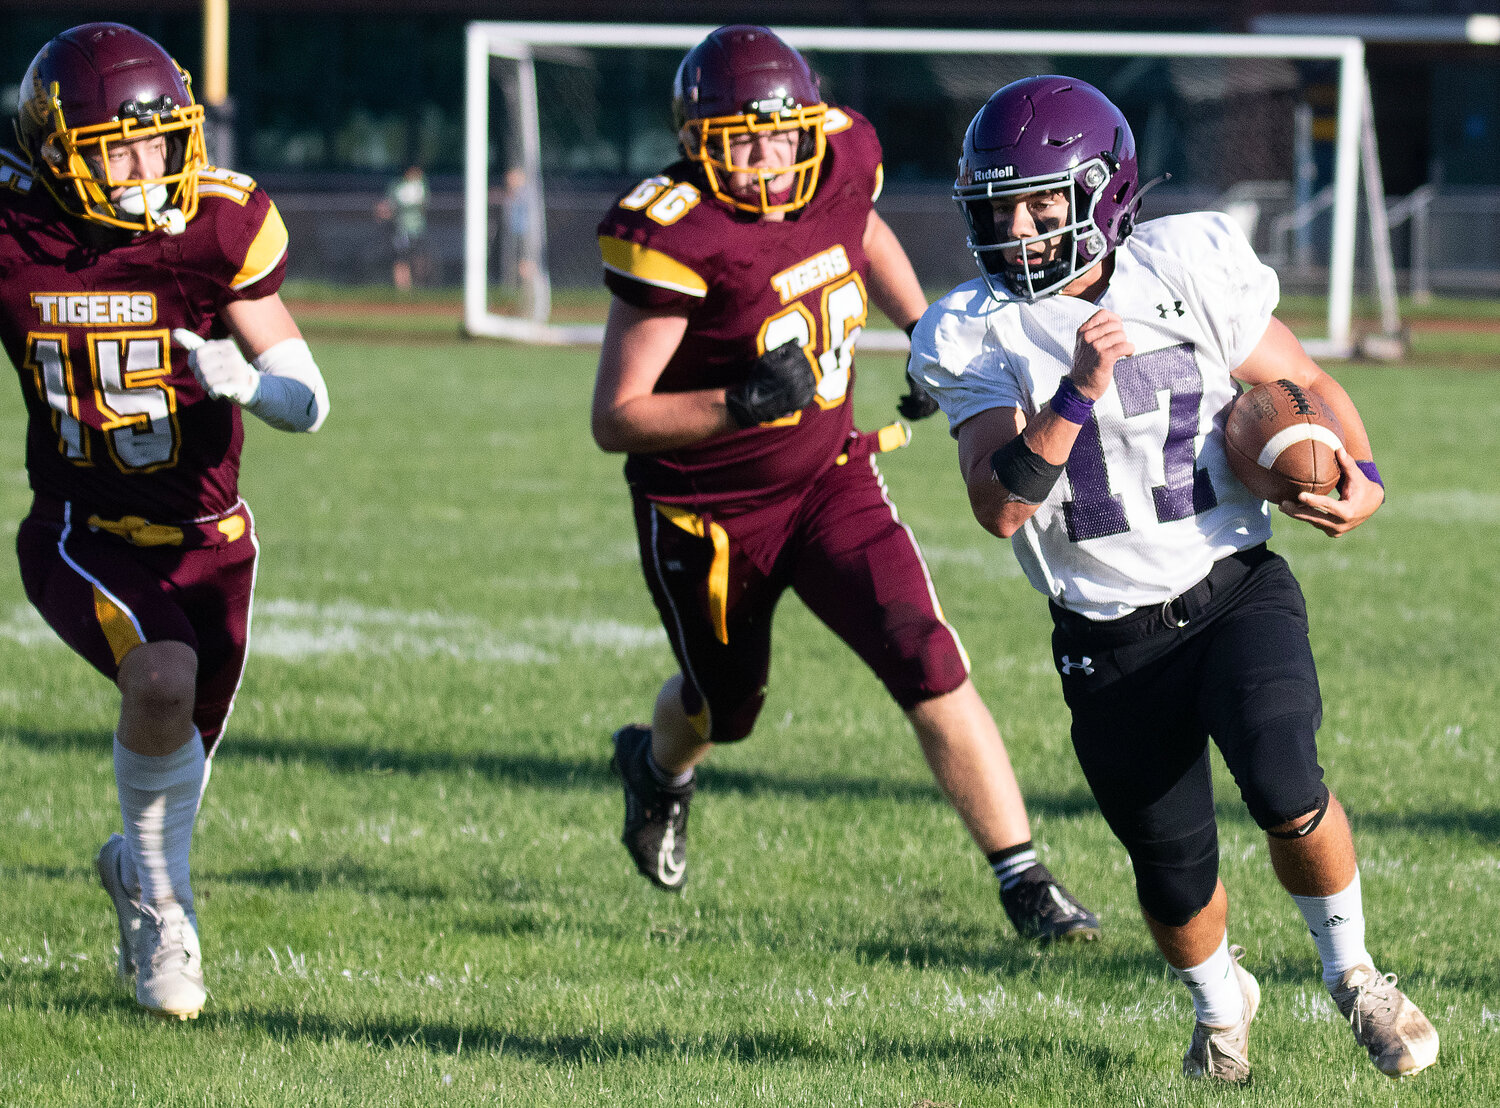 Running back Riley Howland speeds by Tiverton defenders on outside run.